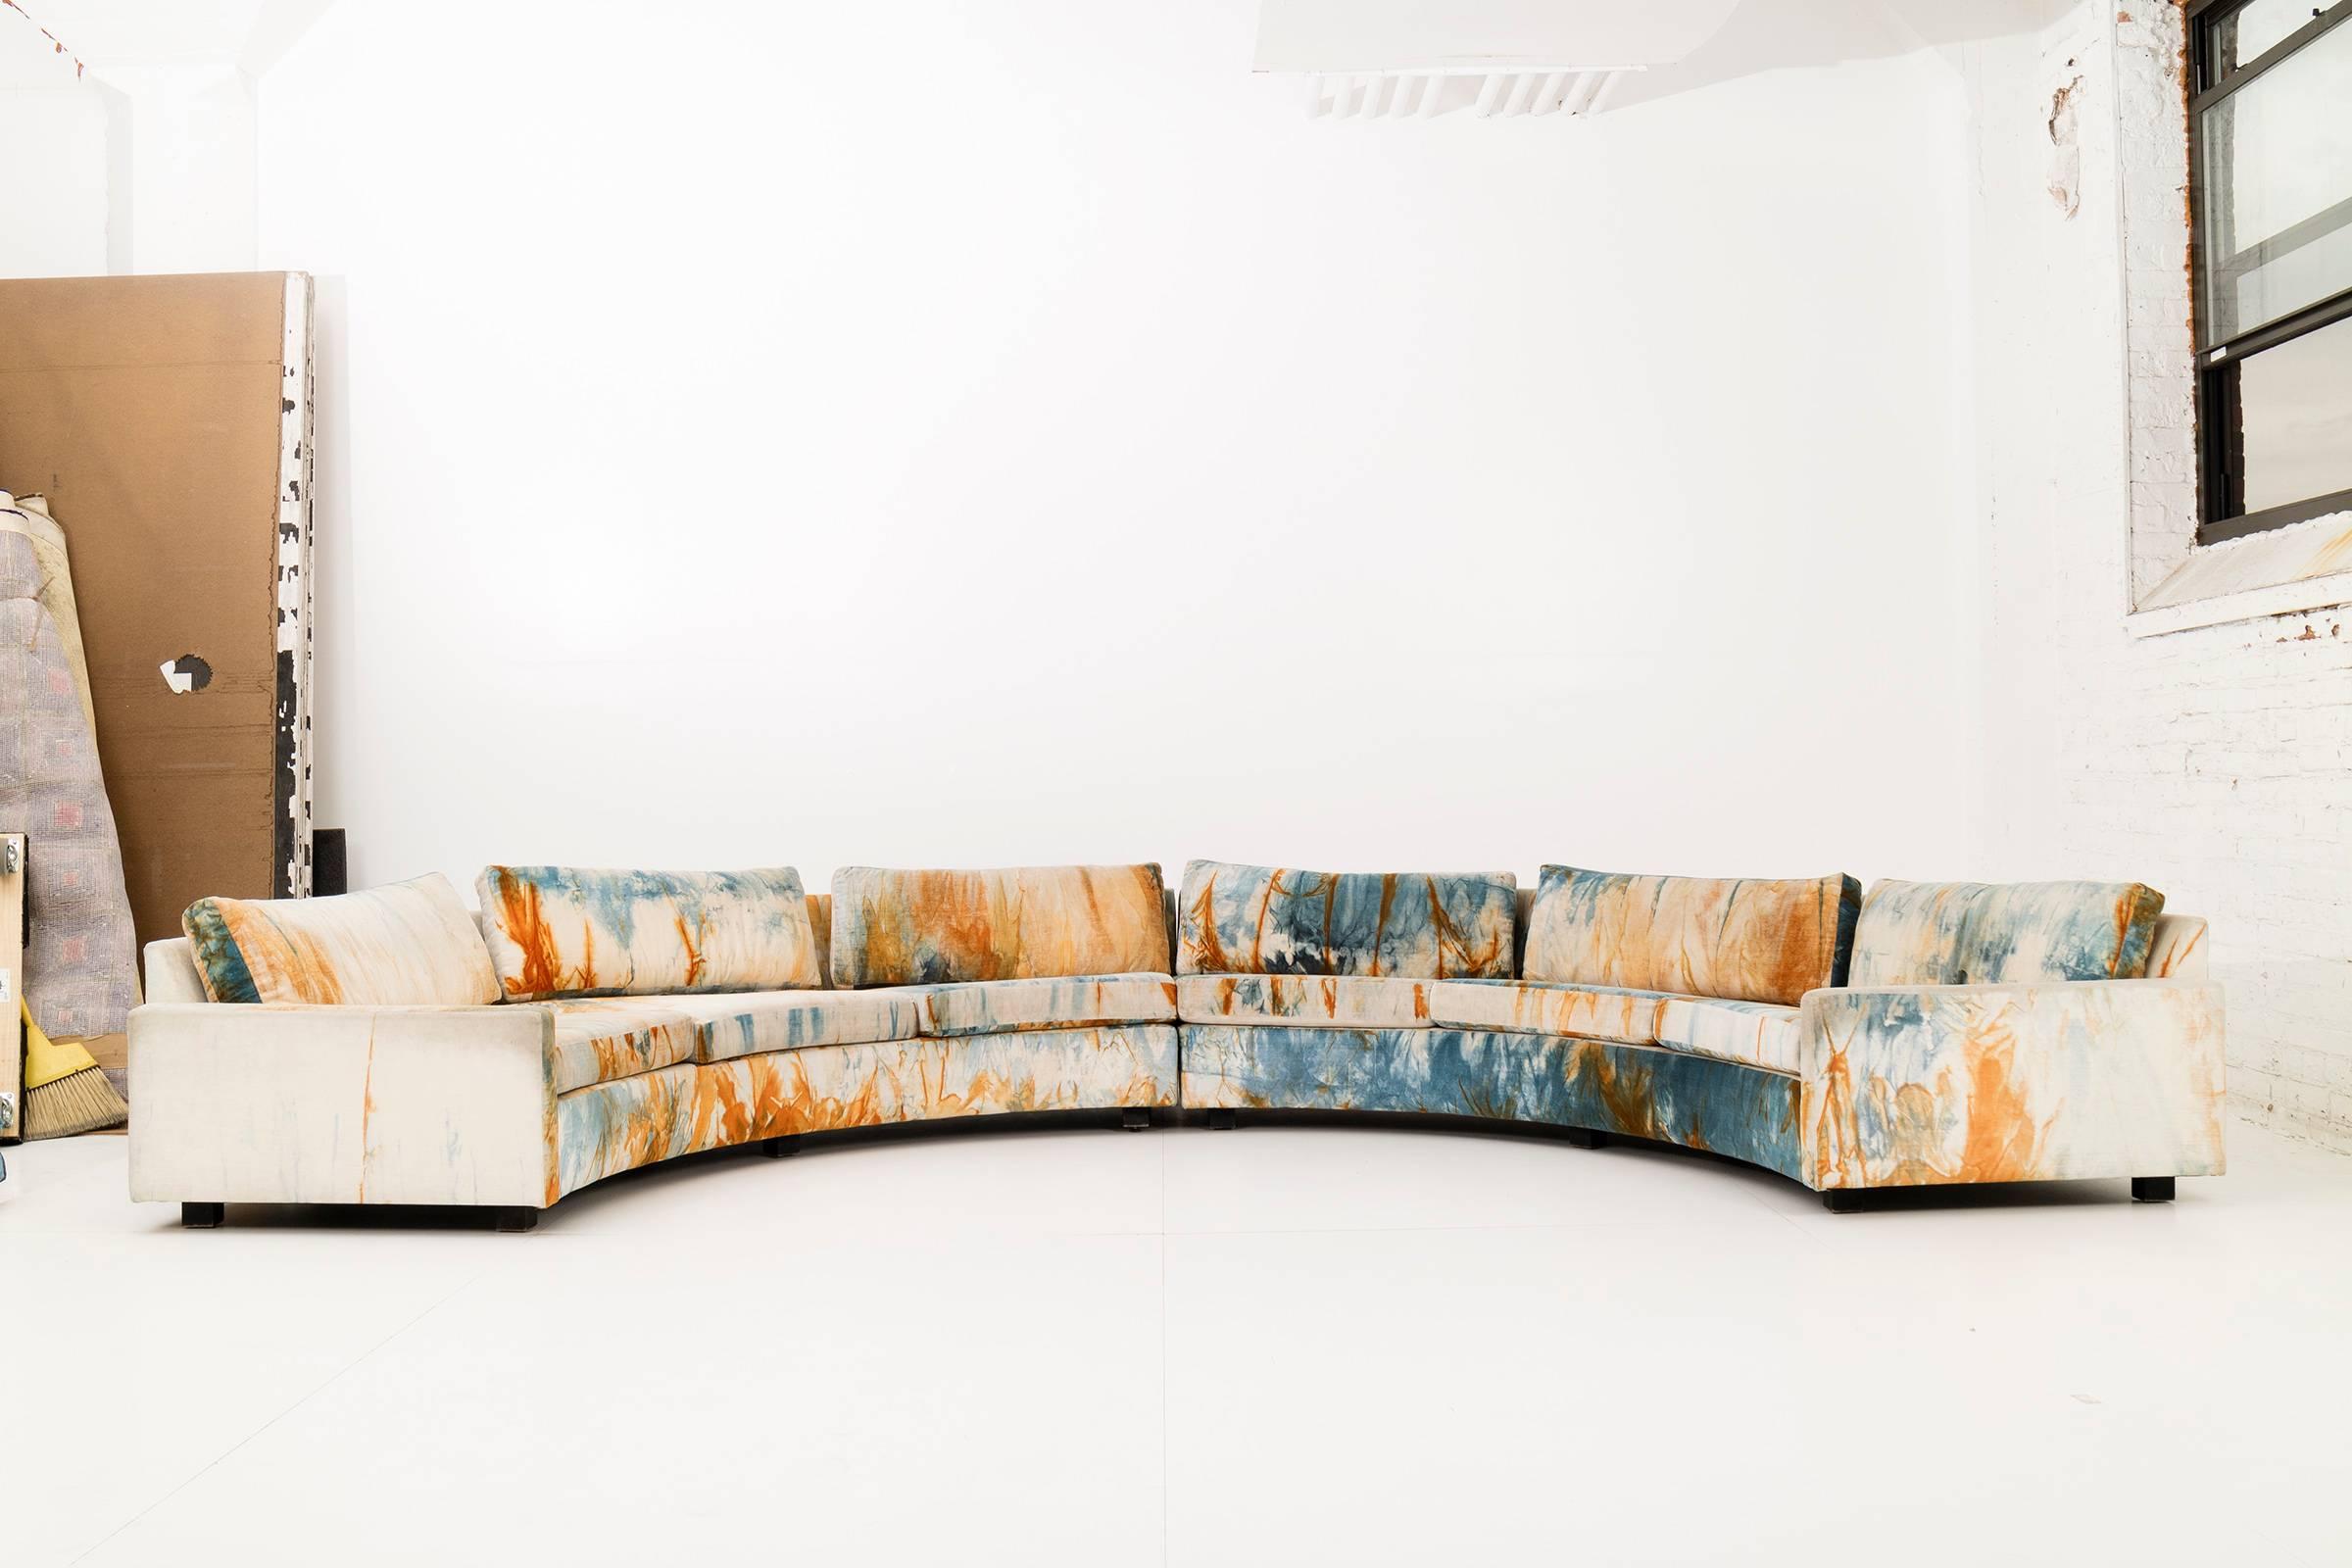 Milo Baughman for Thayer Coggin. Rare sectional with original Jack Lenor Larsen tie-dye upholstery in excellent vintage condition.